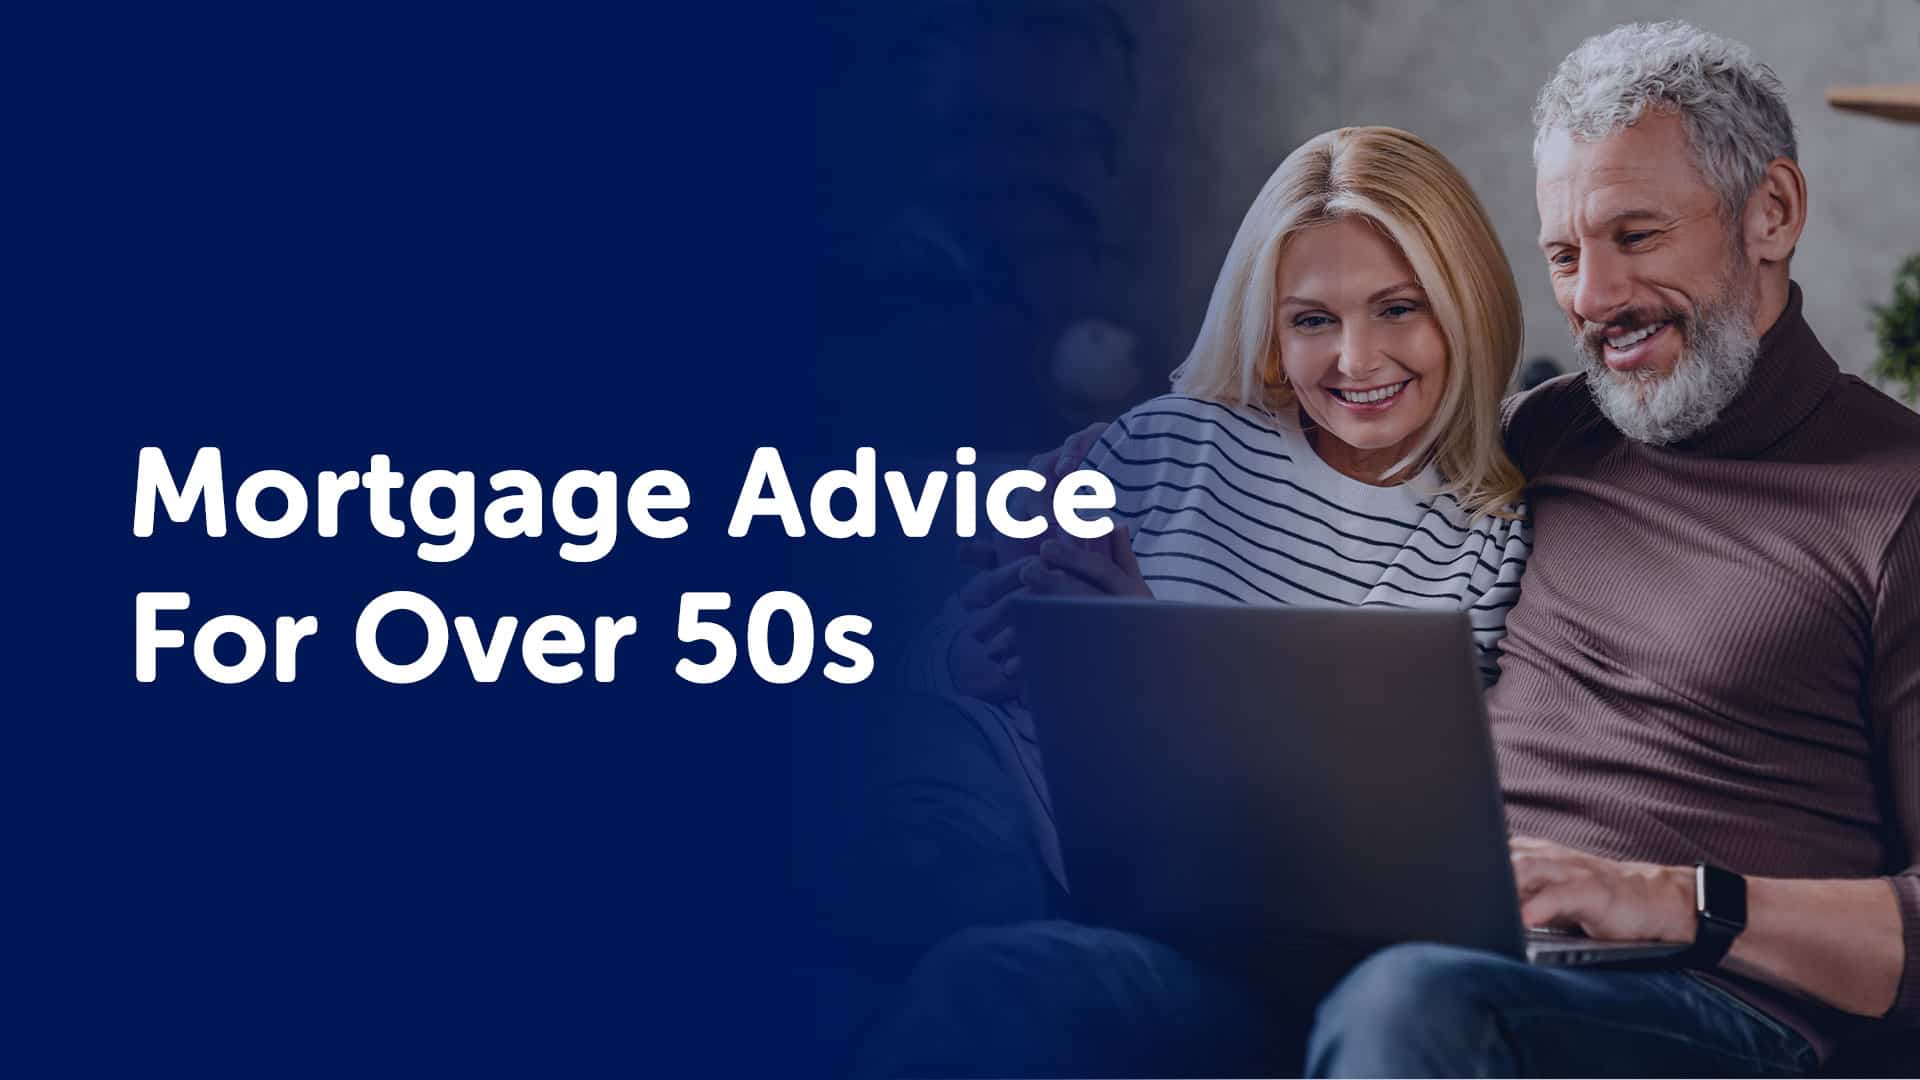 Mortgages For Over 50s in Manchester